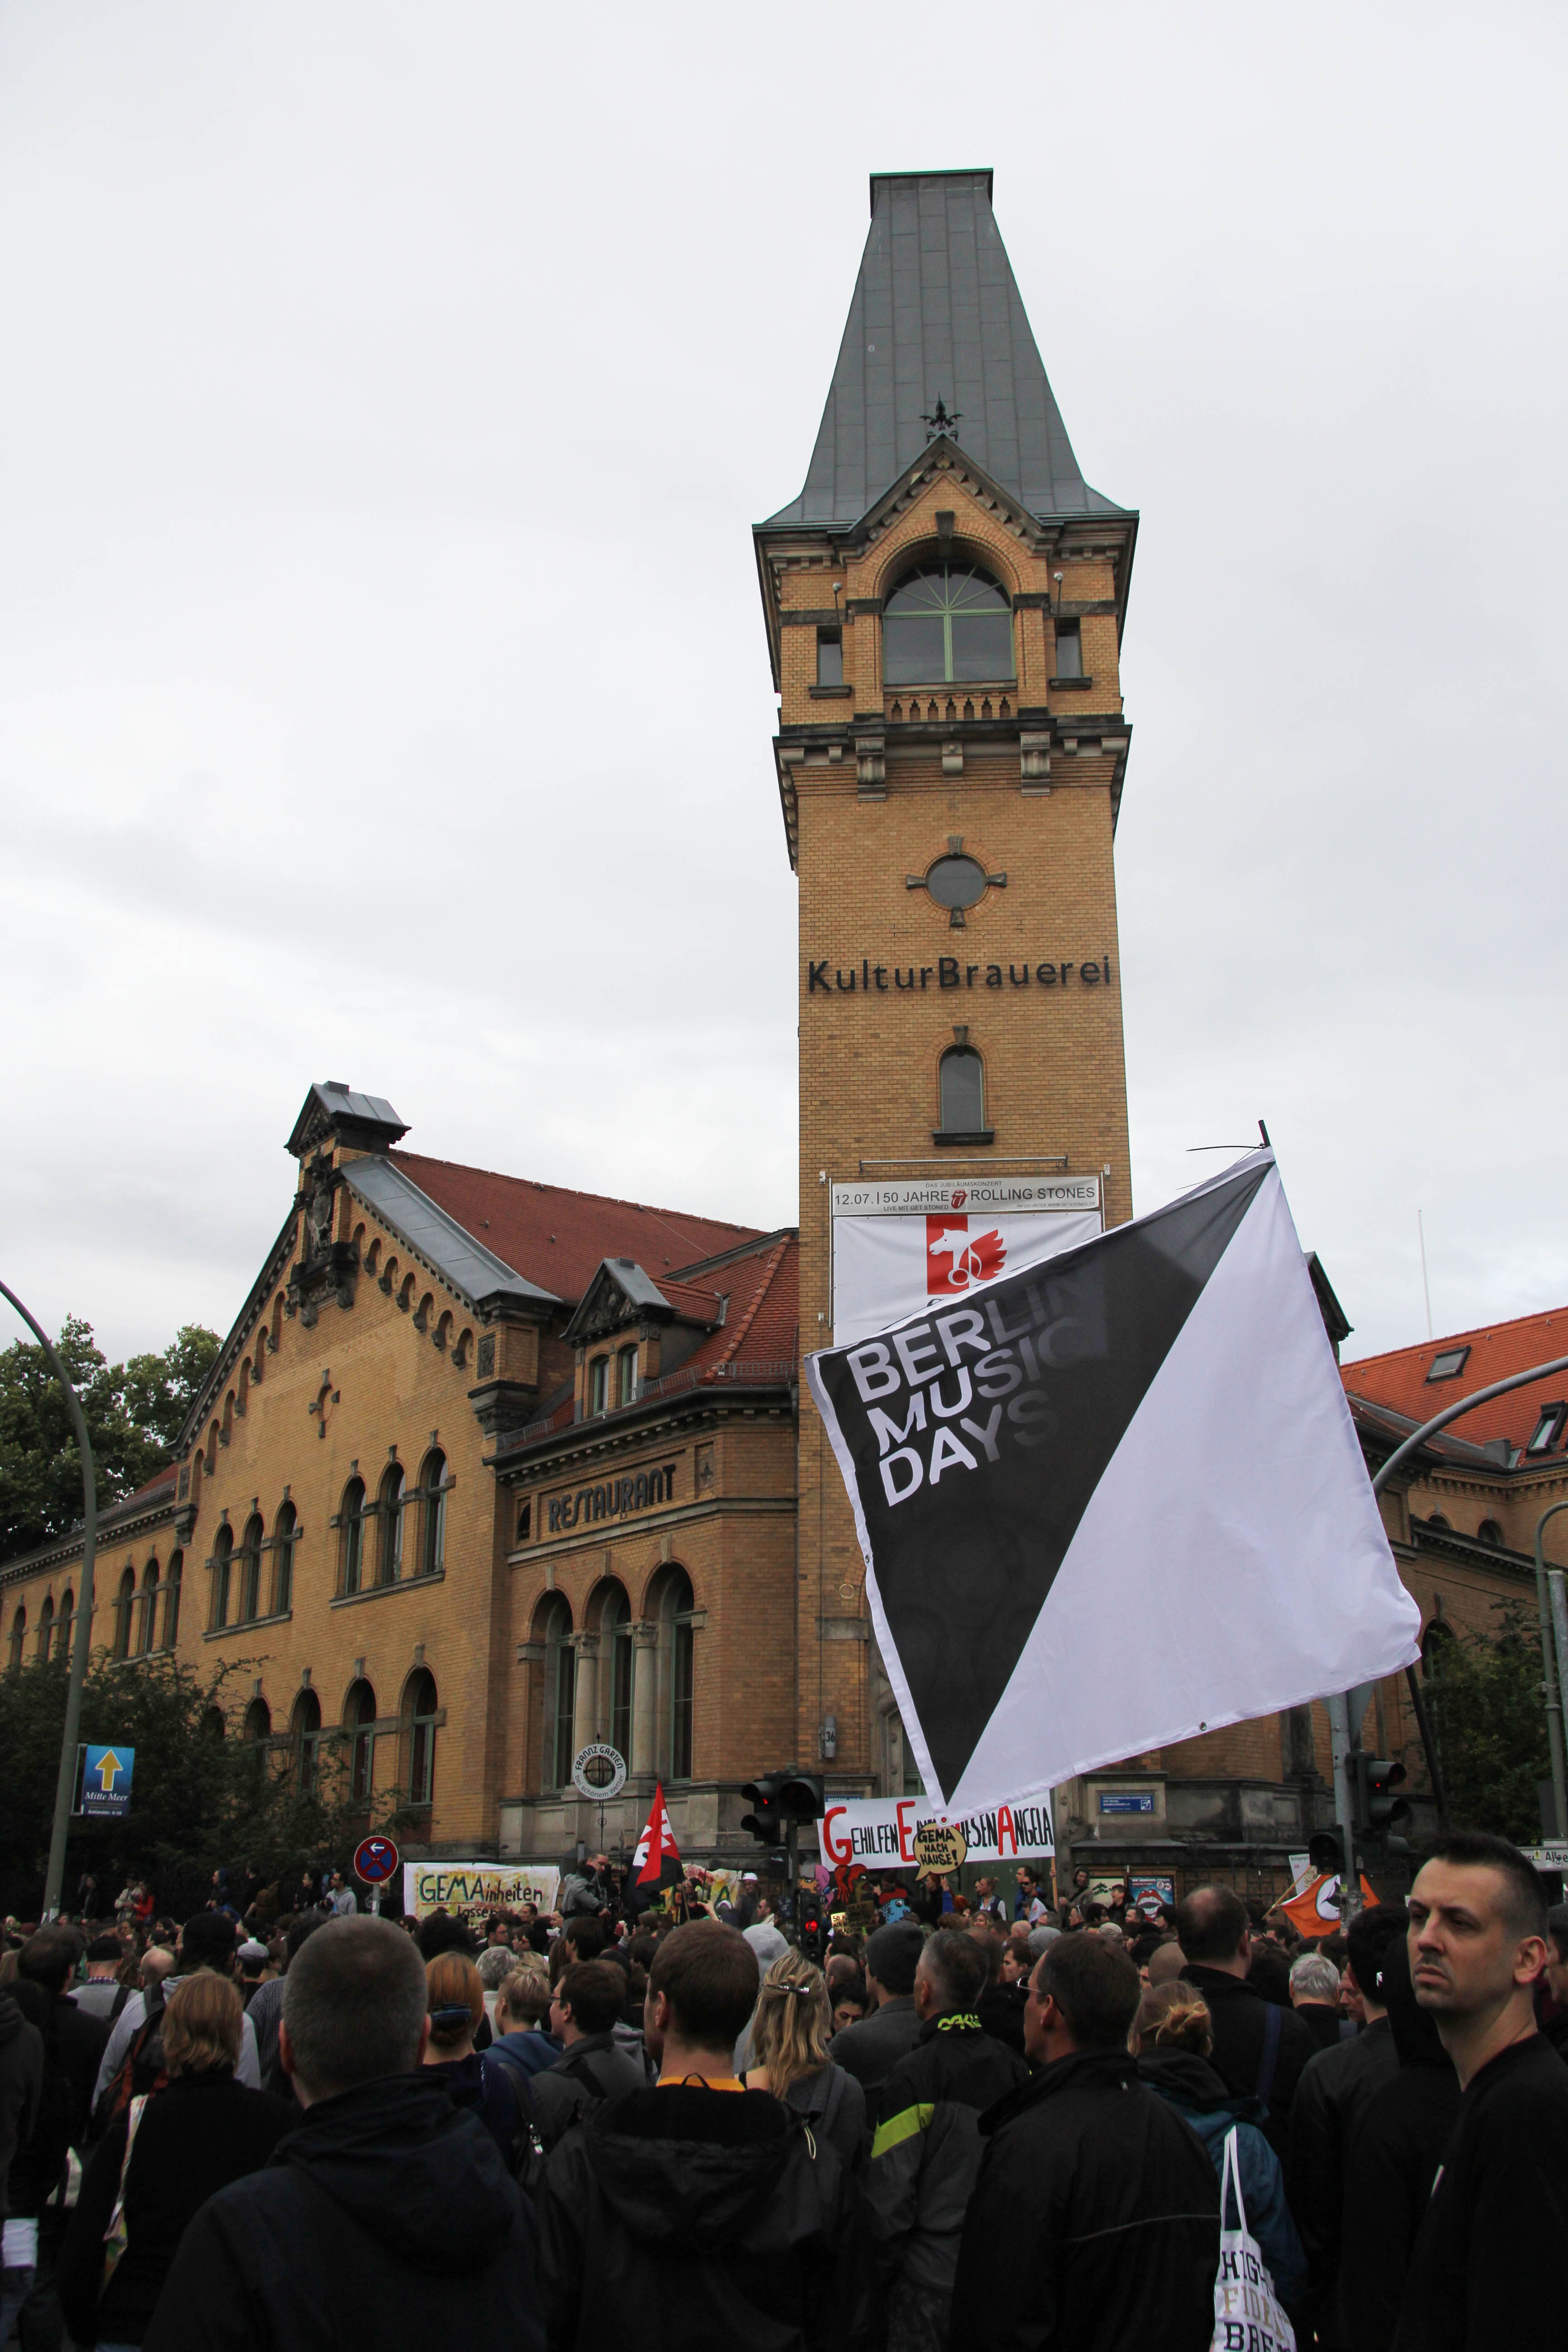 A crowd gathers for the GEMA protest at the Kulturbrauerei in Berlin